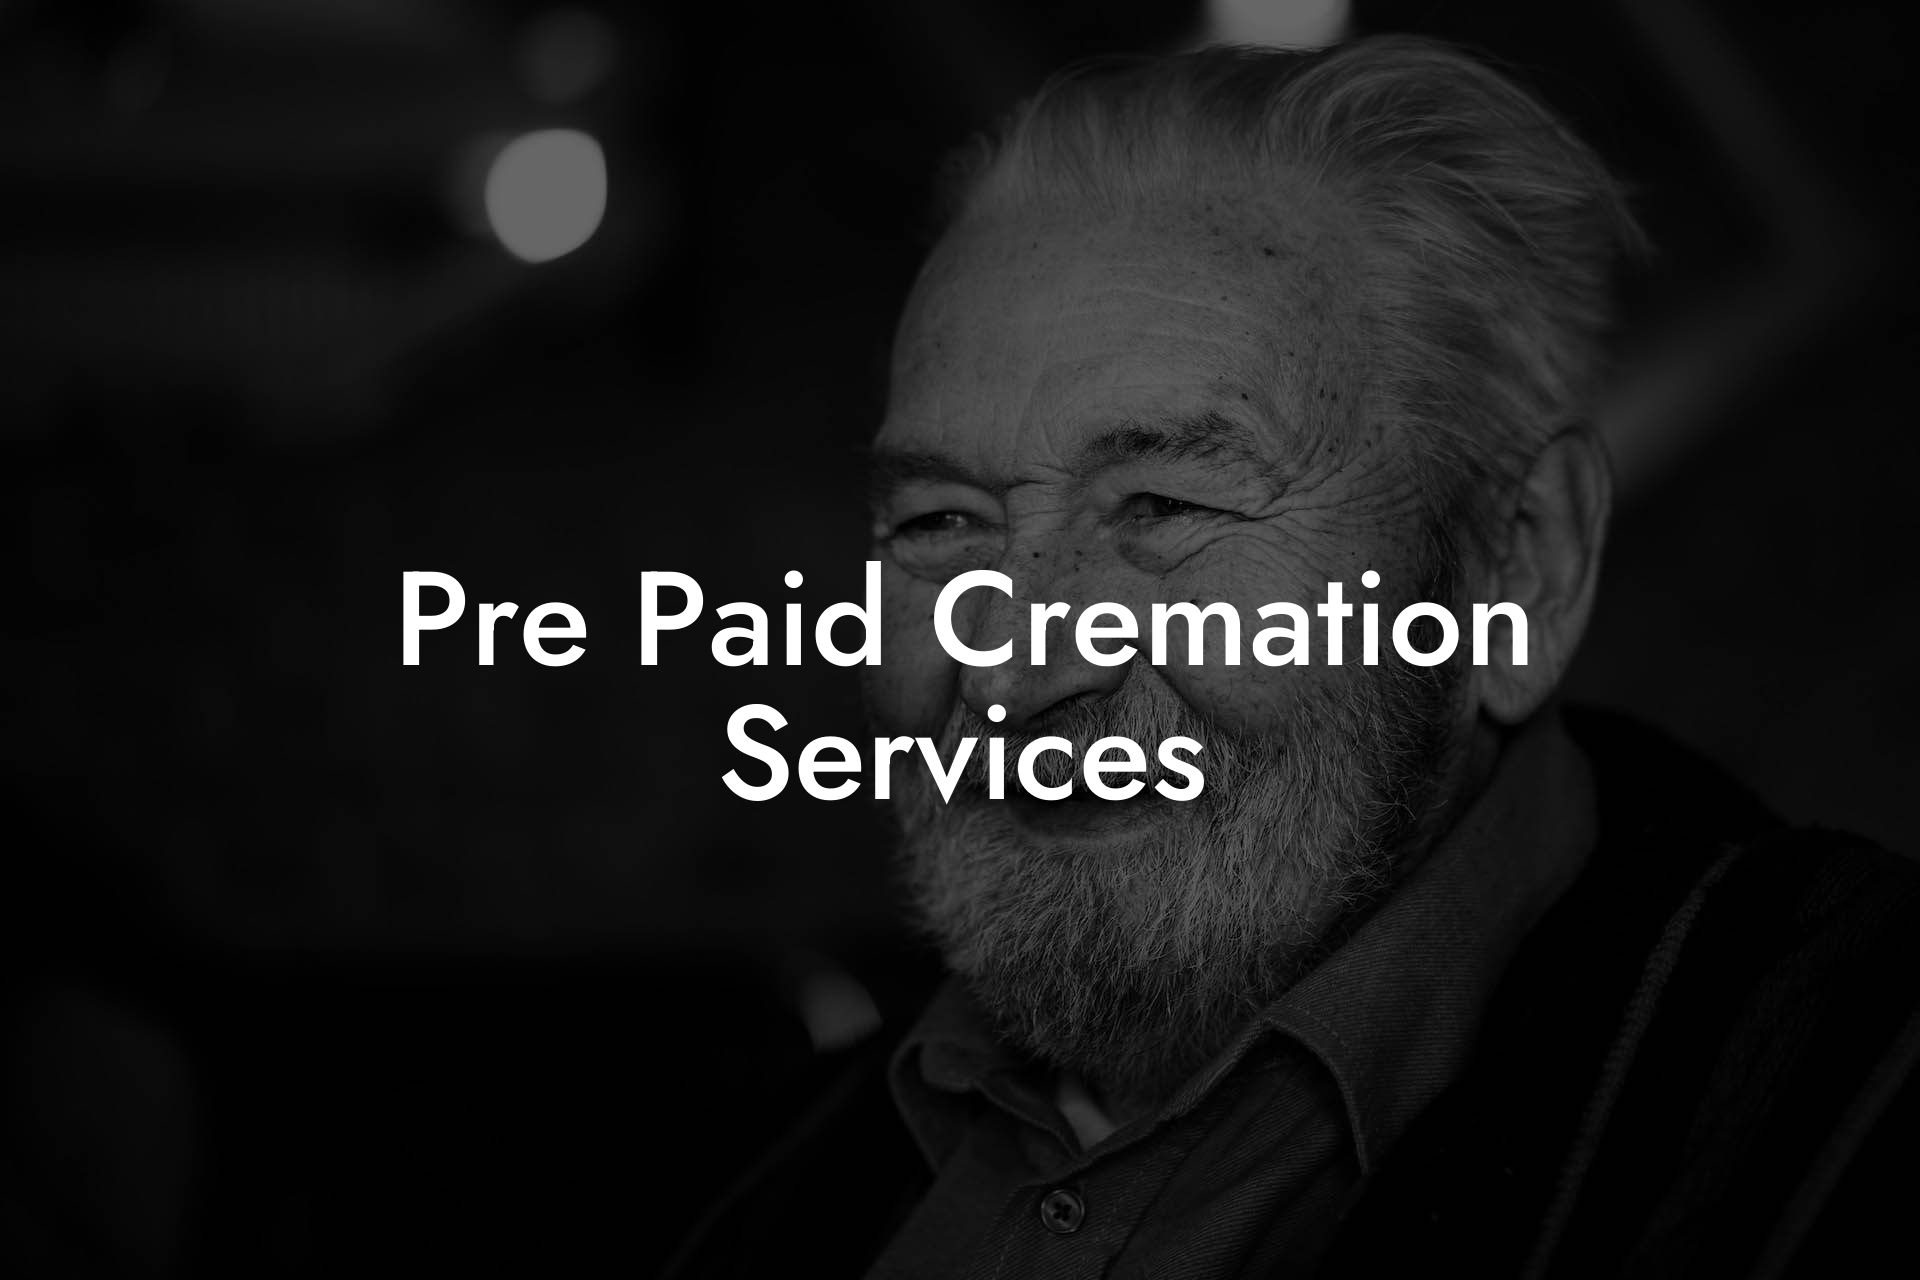 Pre Paid Cremation Services